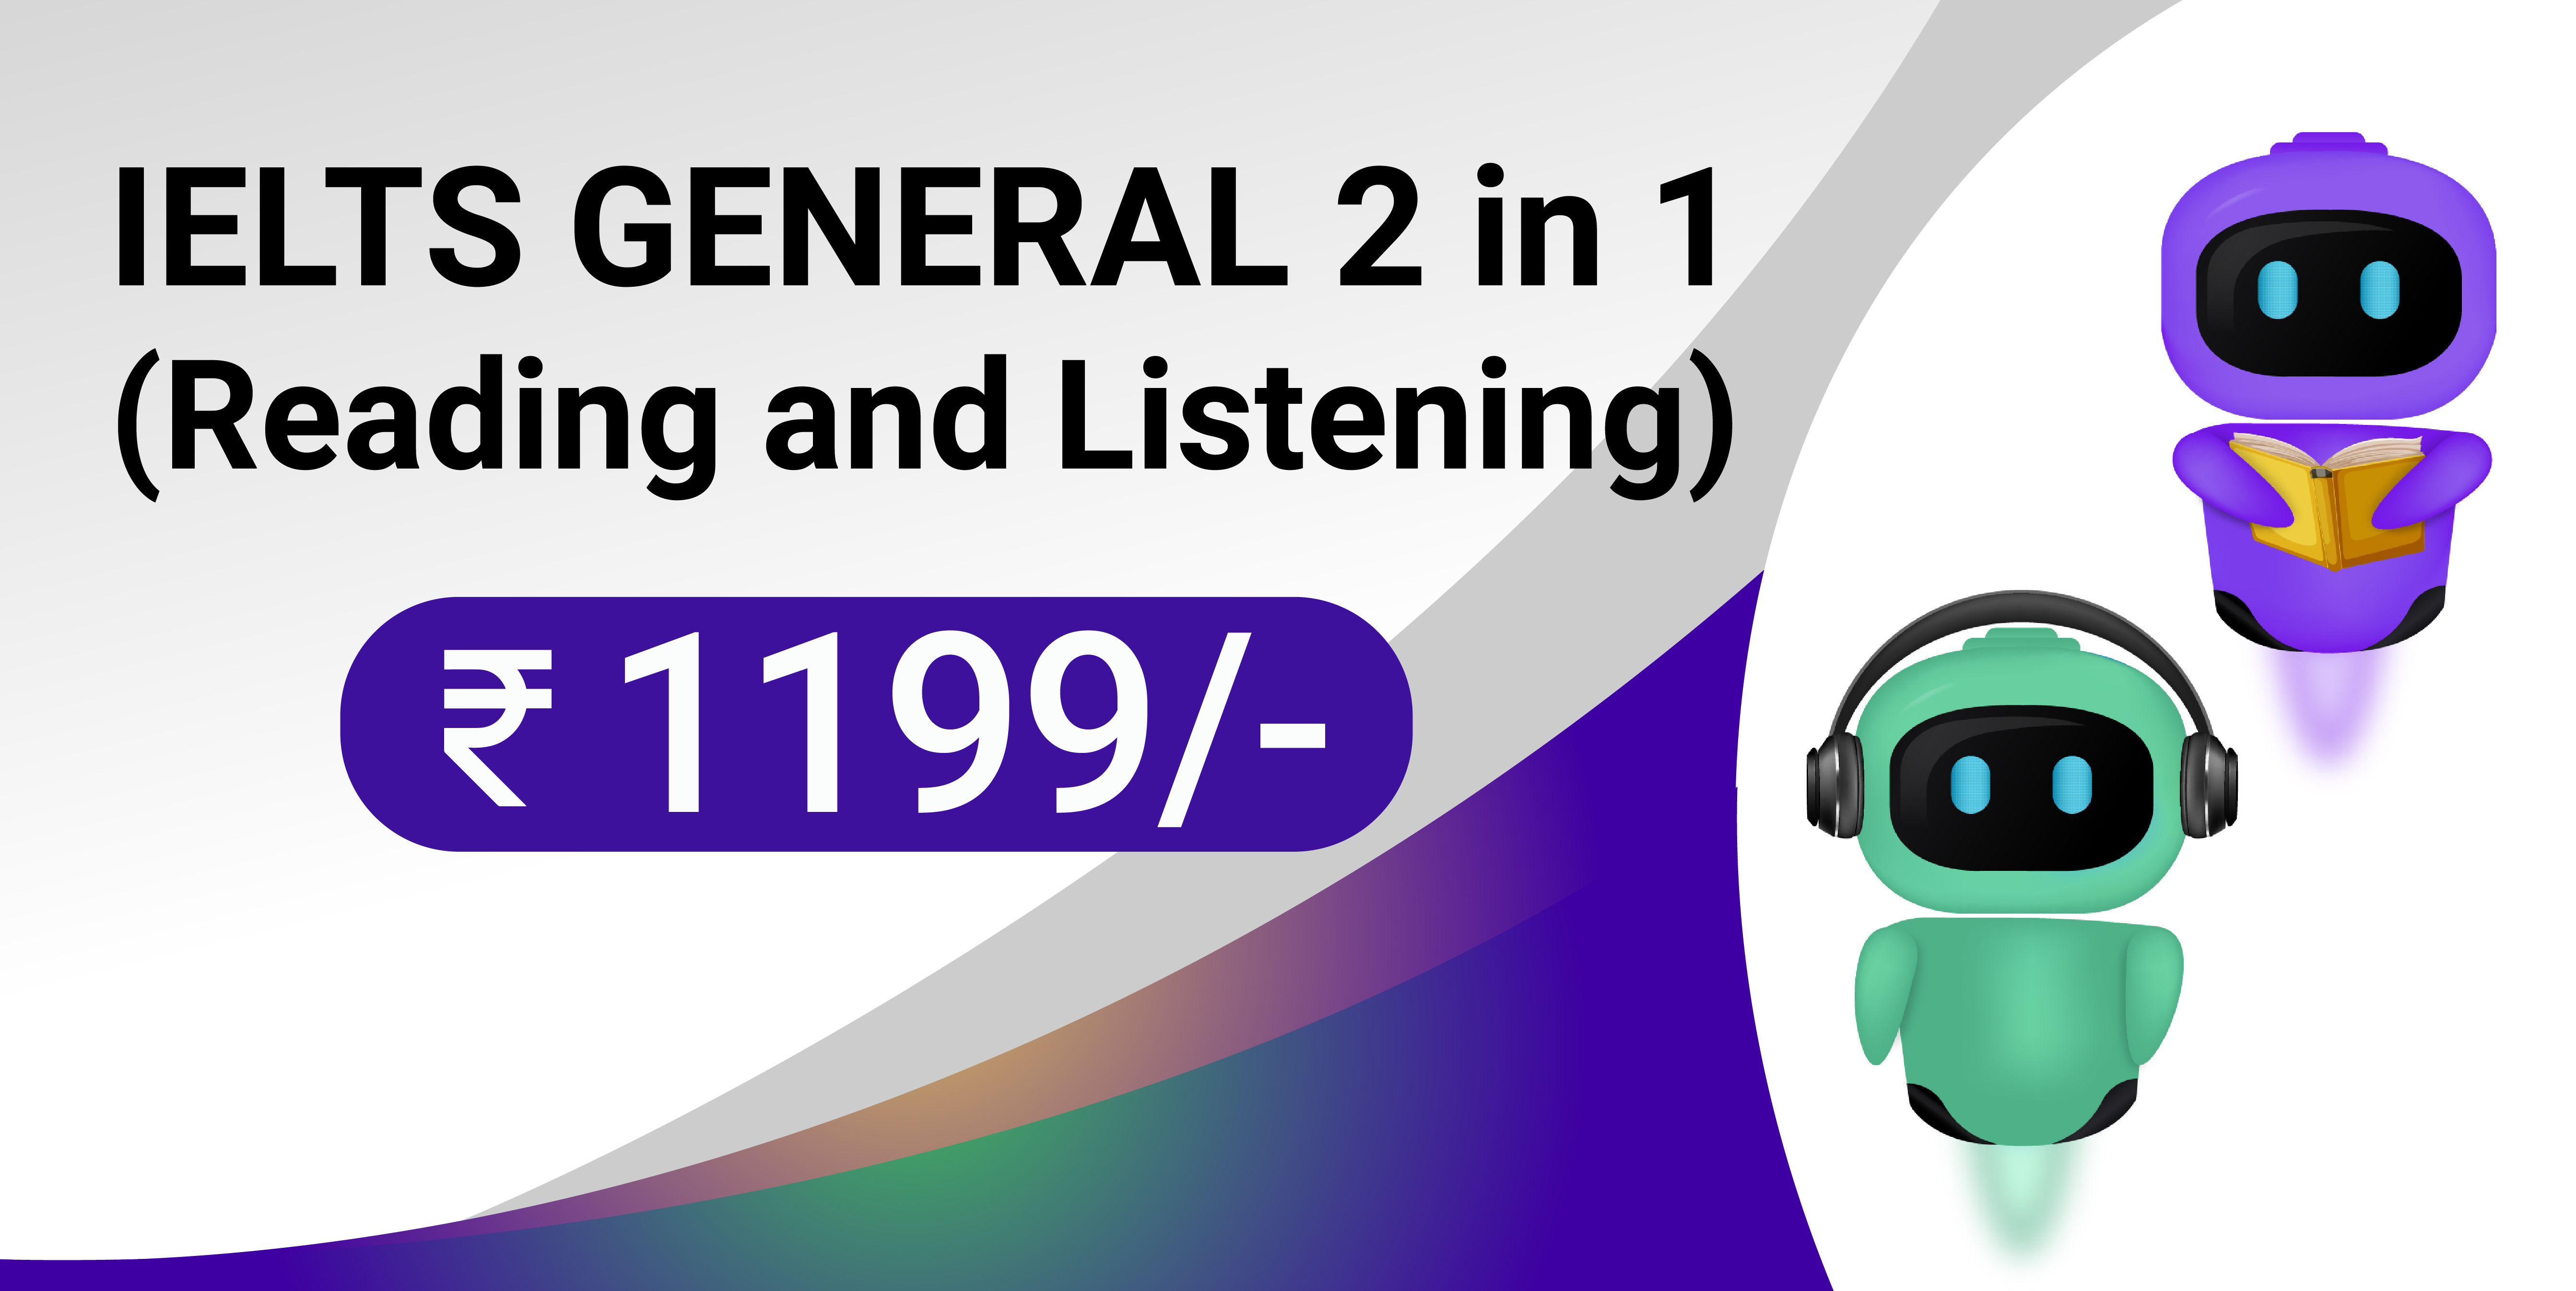 IELTS GENERAL 2 in 1 (Reading and Listening)